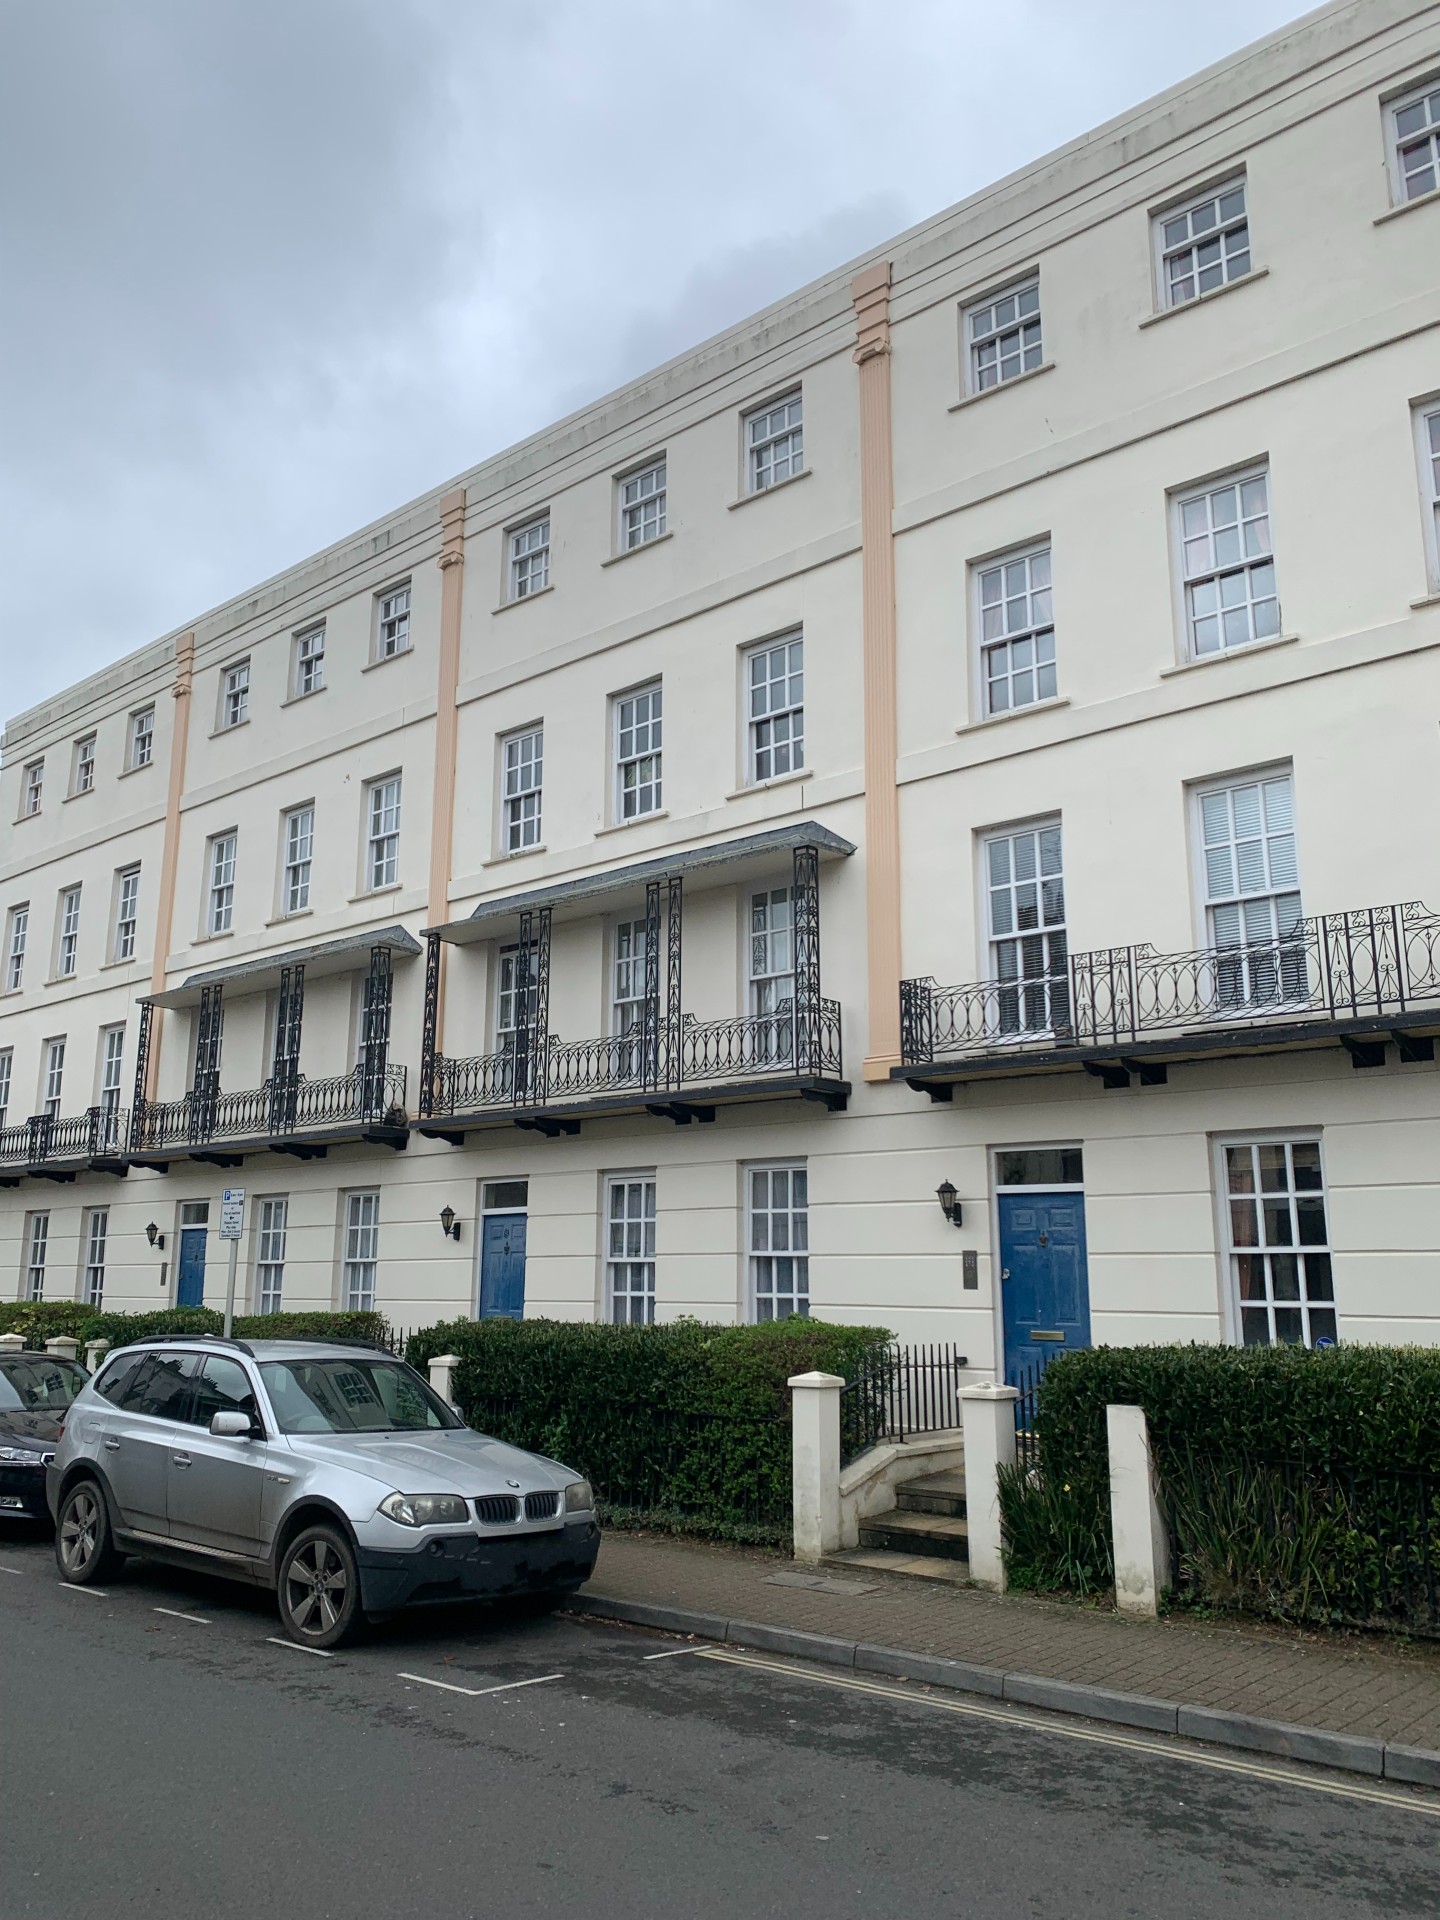 ASD Contracts Transforms Georgian Style Apartments In Central Cheltenham thanks to £2.3m Investment Property Loan